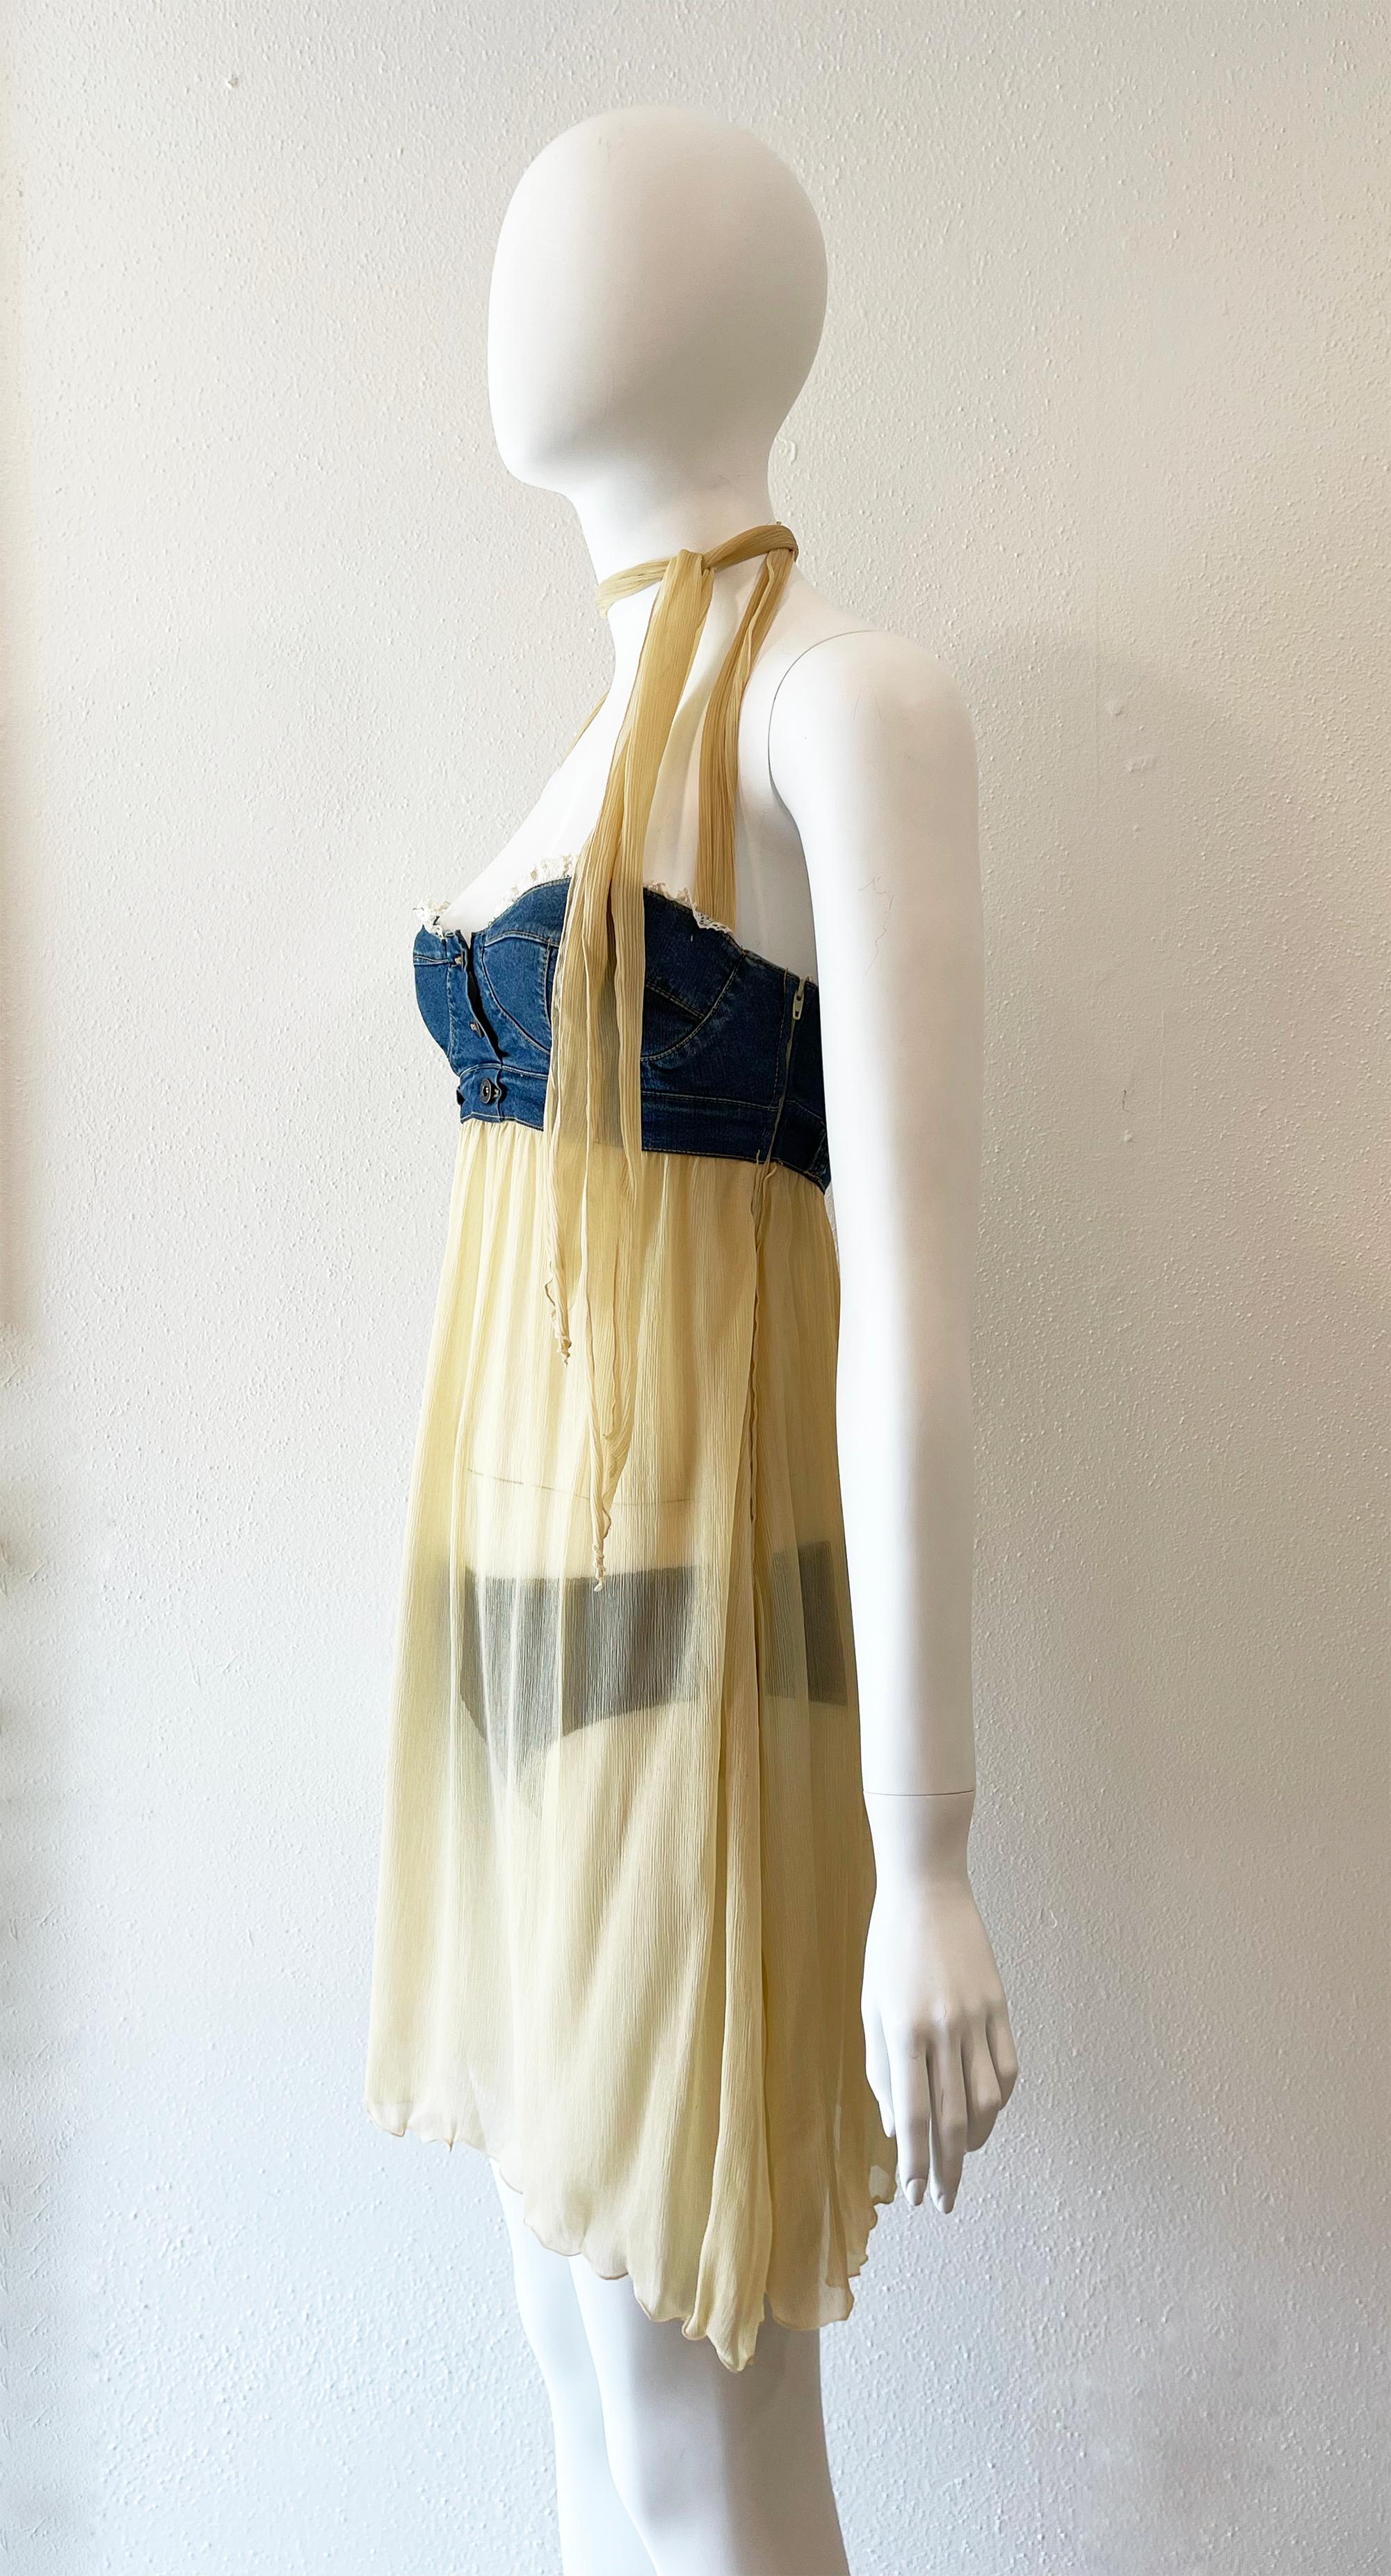 2000s D&G sheer dress with denim bustier and stretch bottoms. 
Sz M/ US 6 / IT 42
Condition: Very good, no visble damage 
29.5